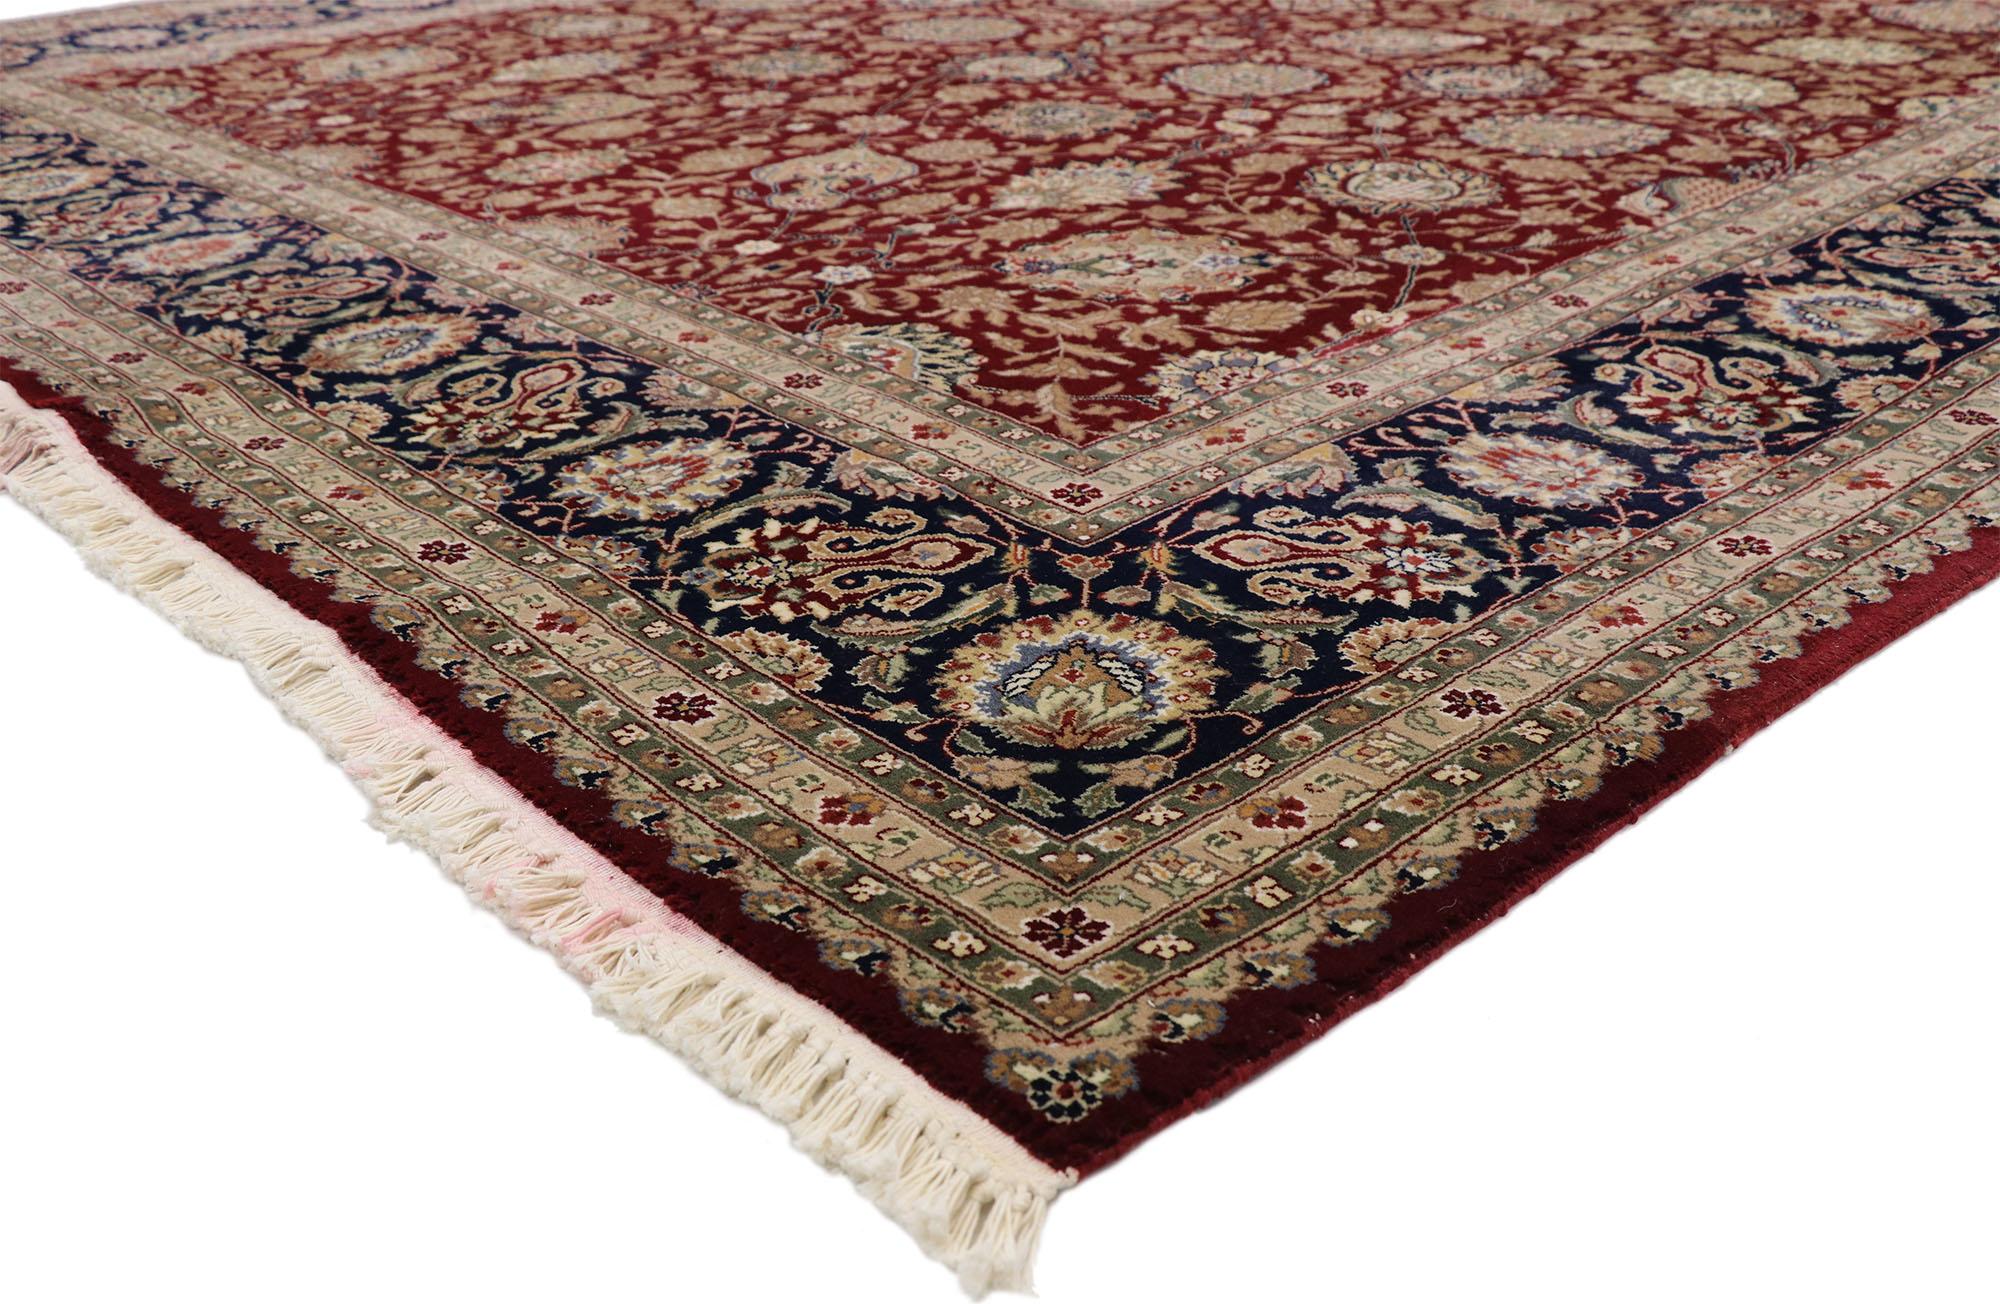 77369 Vintage Chinese Persian Tabriz Design Rug with Colonial and Federal Style 08'10 x 11'09. This hand knotted vintage Chinese Persian Tabriz design rug features an all-over Shah Abbas design composed of blooming palmettes, curved sickle leaves,